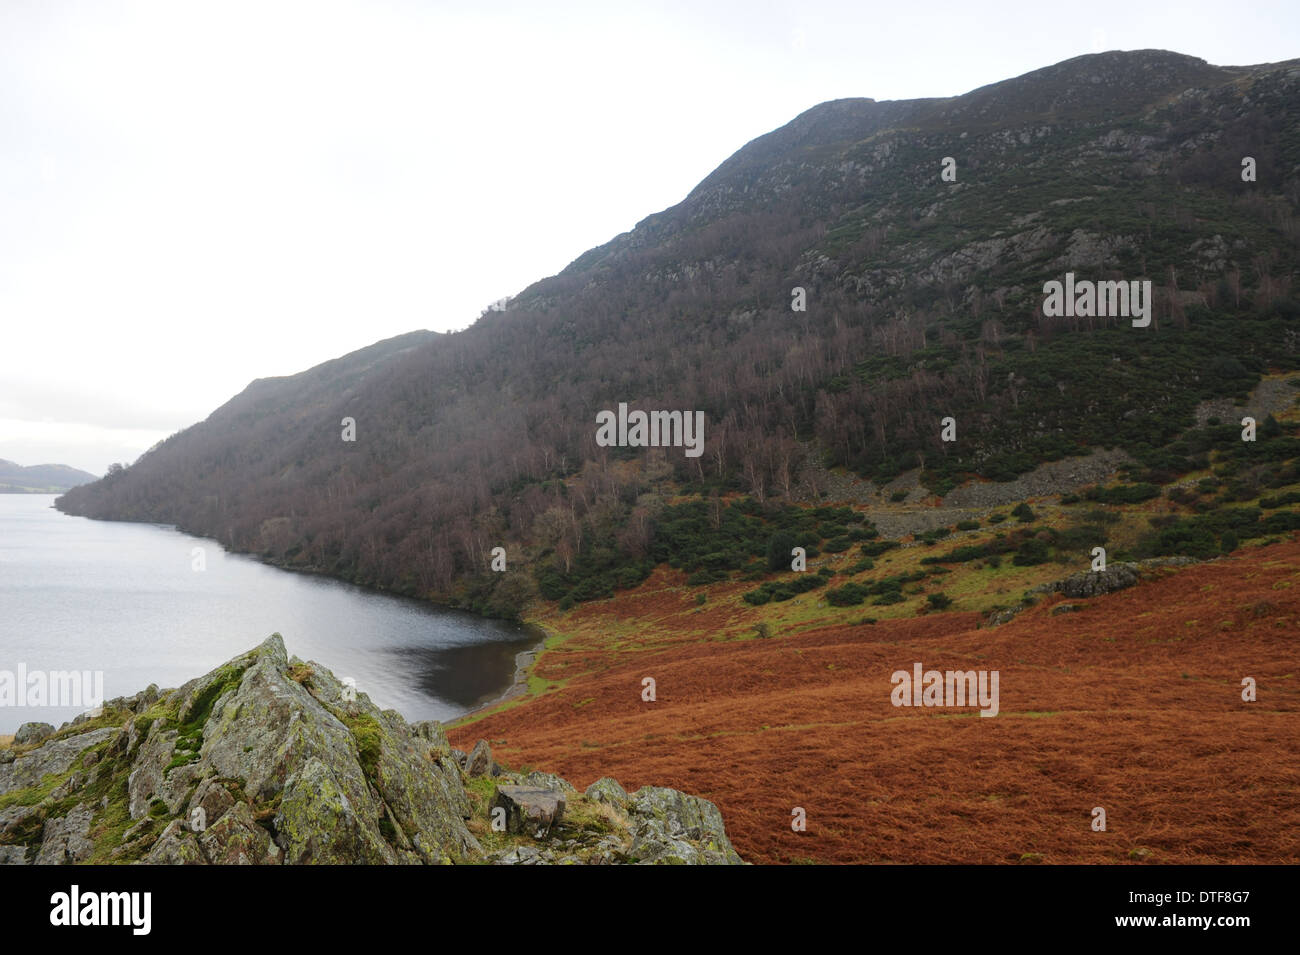 Panoramic View of the Landscape  from Silverpoint looking at Birk fell on the edge of Ullswater in the Lake District National Park Stock Photo